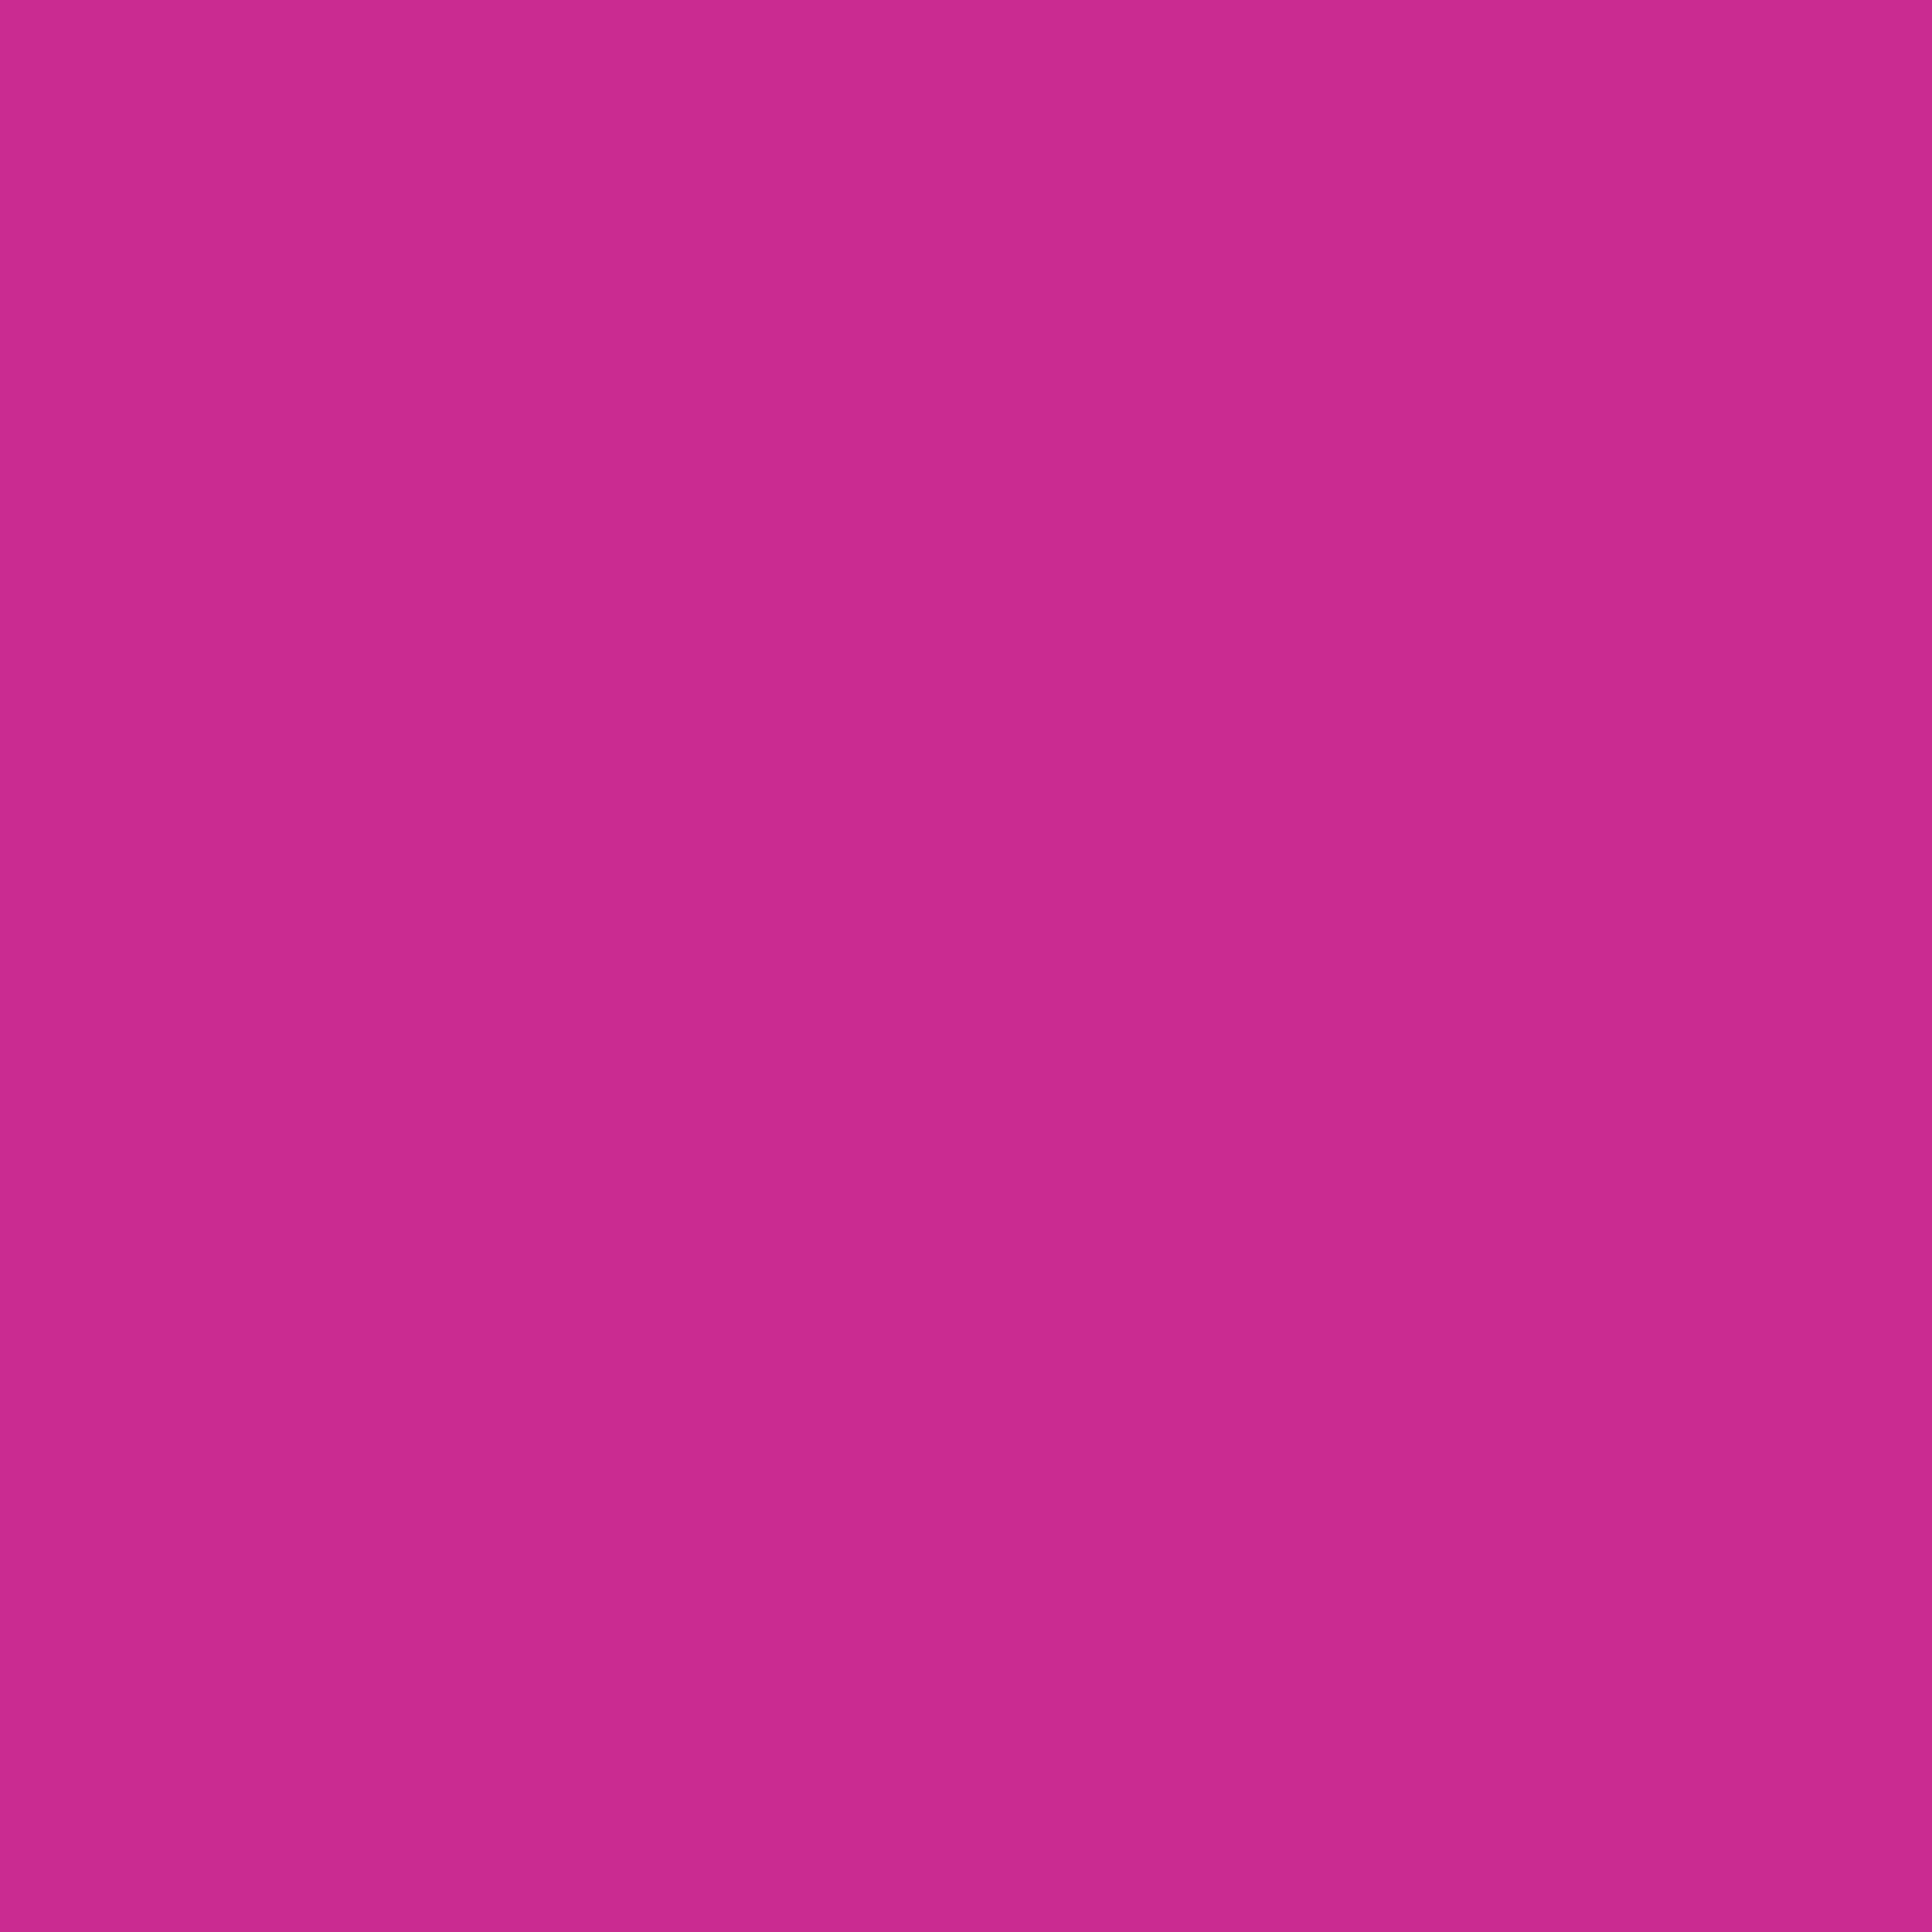 2048x2048 Royal Fuchsia Solid Color Background